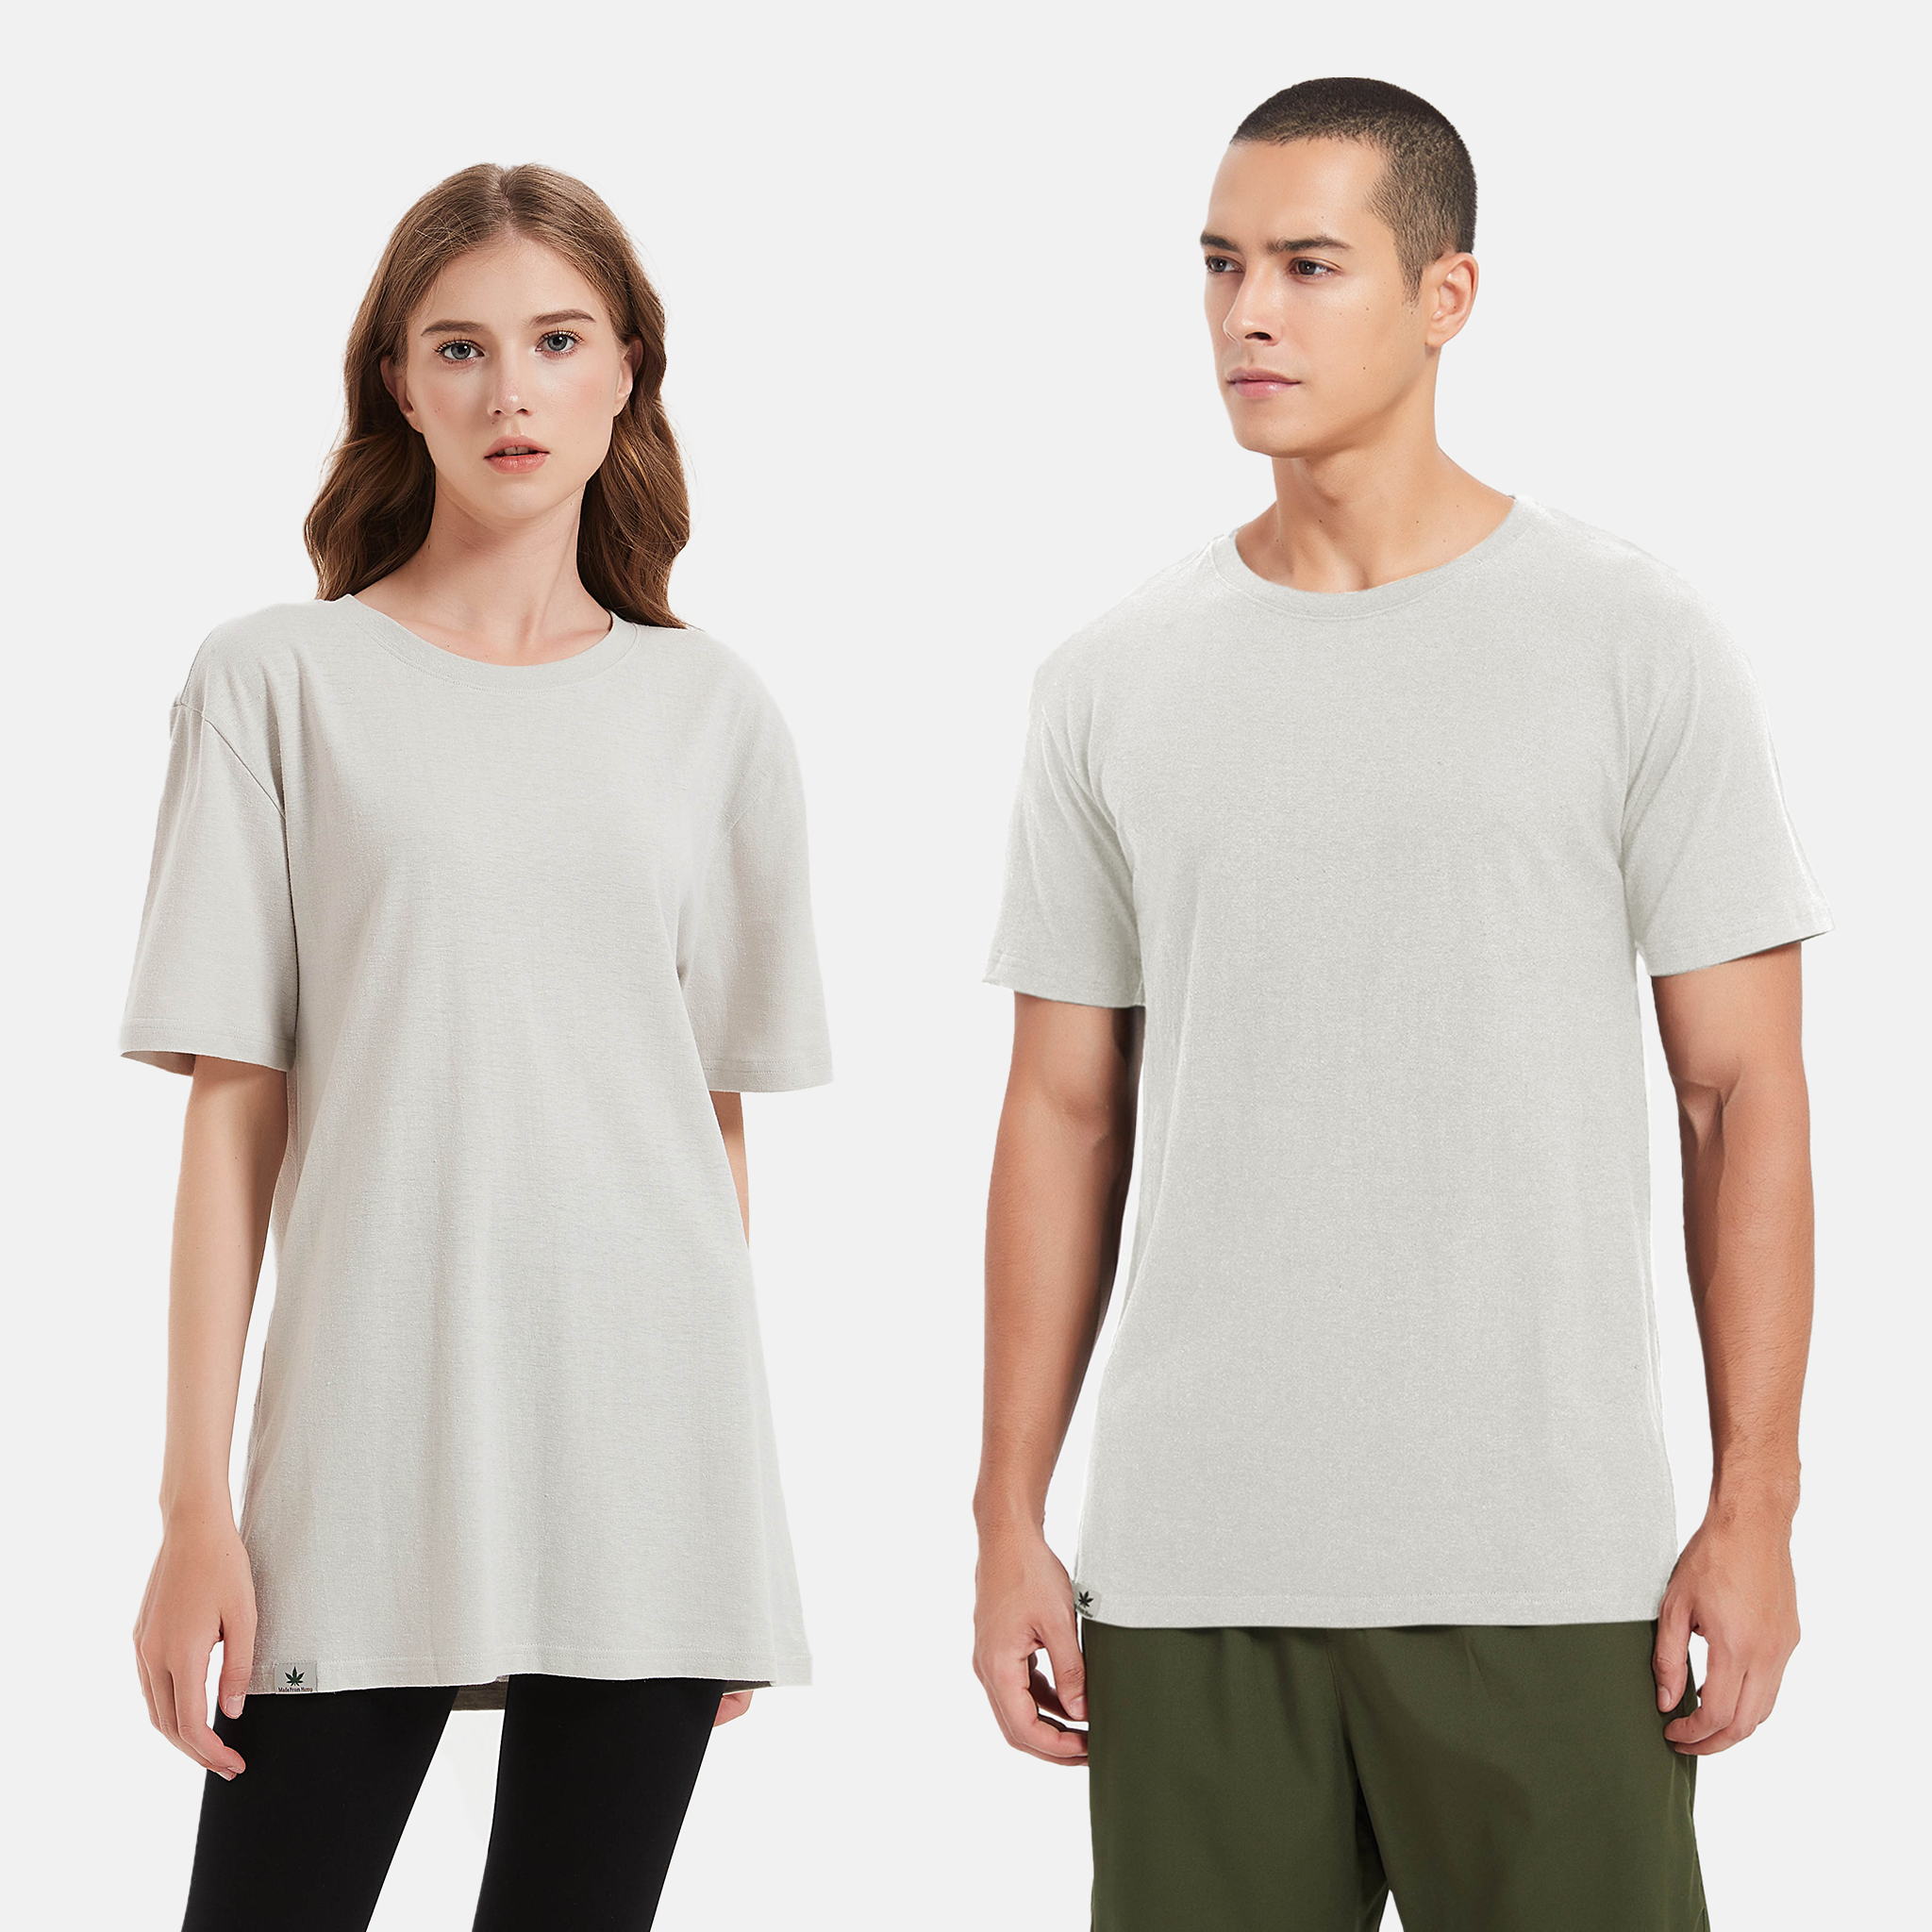 Organic cotton, gray t-shirt, environmentally friendly and stylish, sustainable clothing, eco-friendly, natural, Mens and Womens